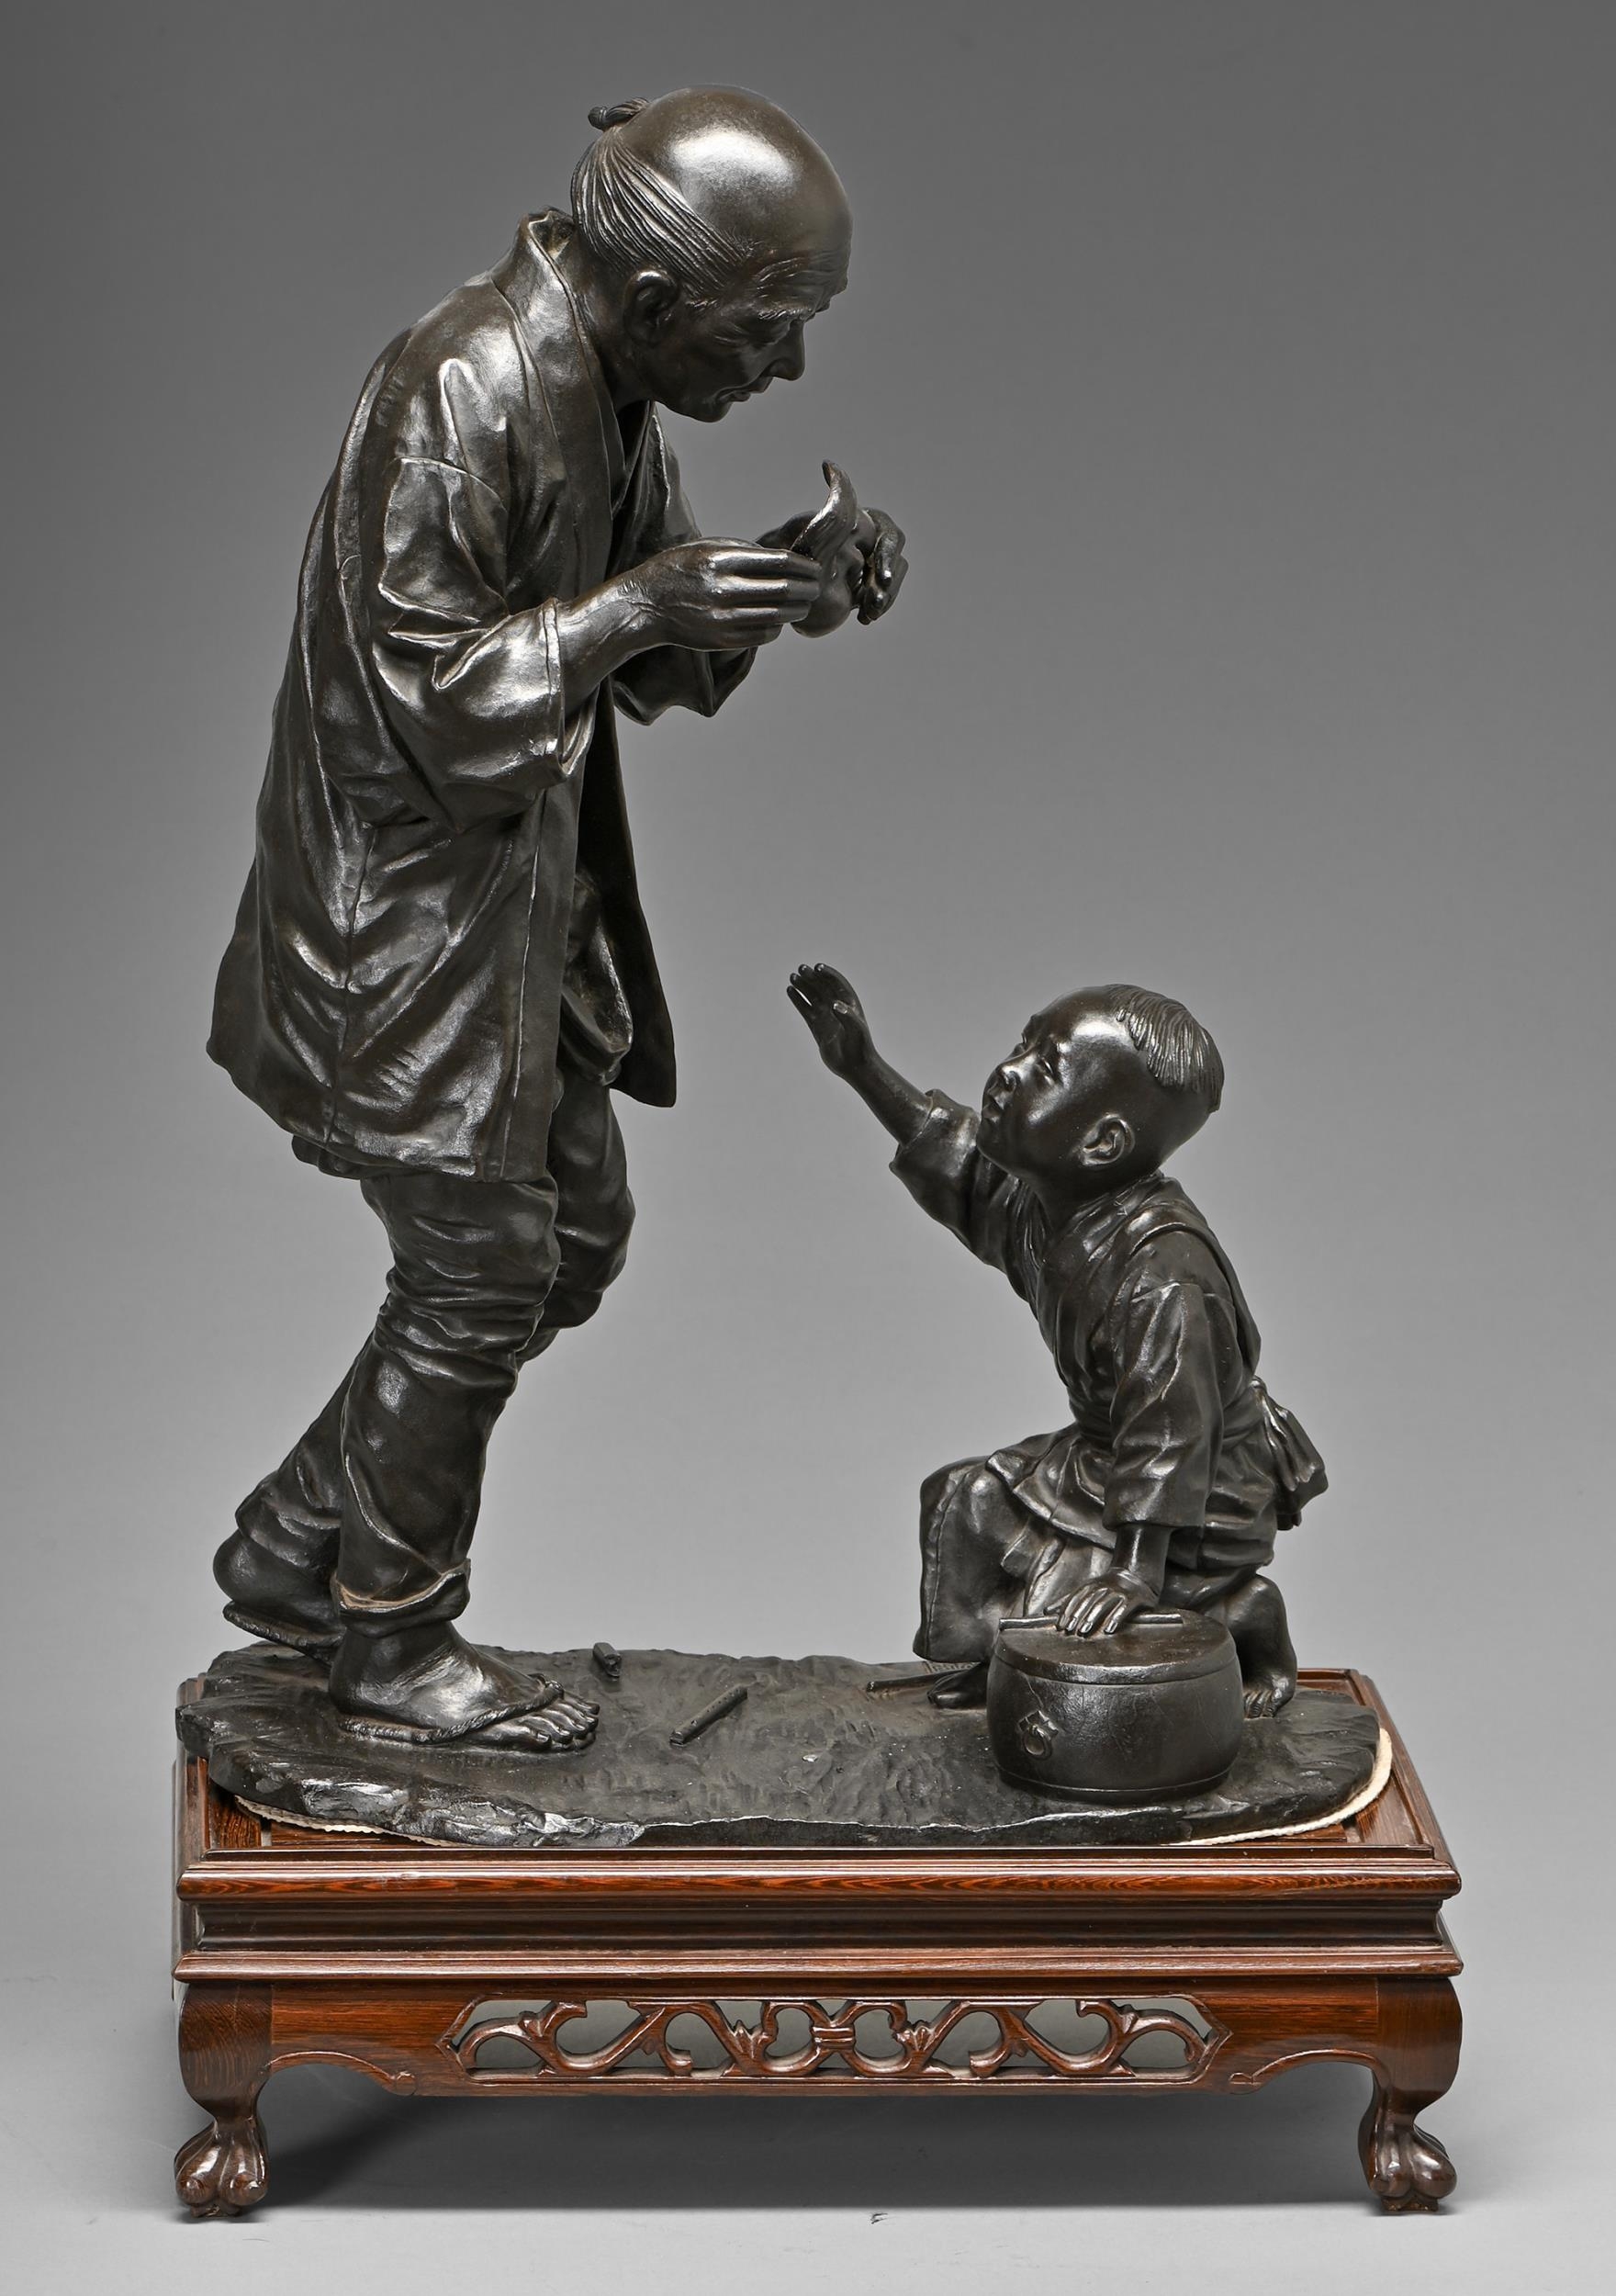 A Japanese bronze sculpture of a man and his small son with Noh mask and drum, Meiji period, even